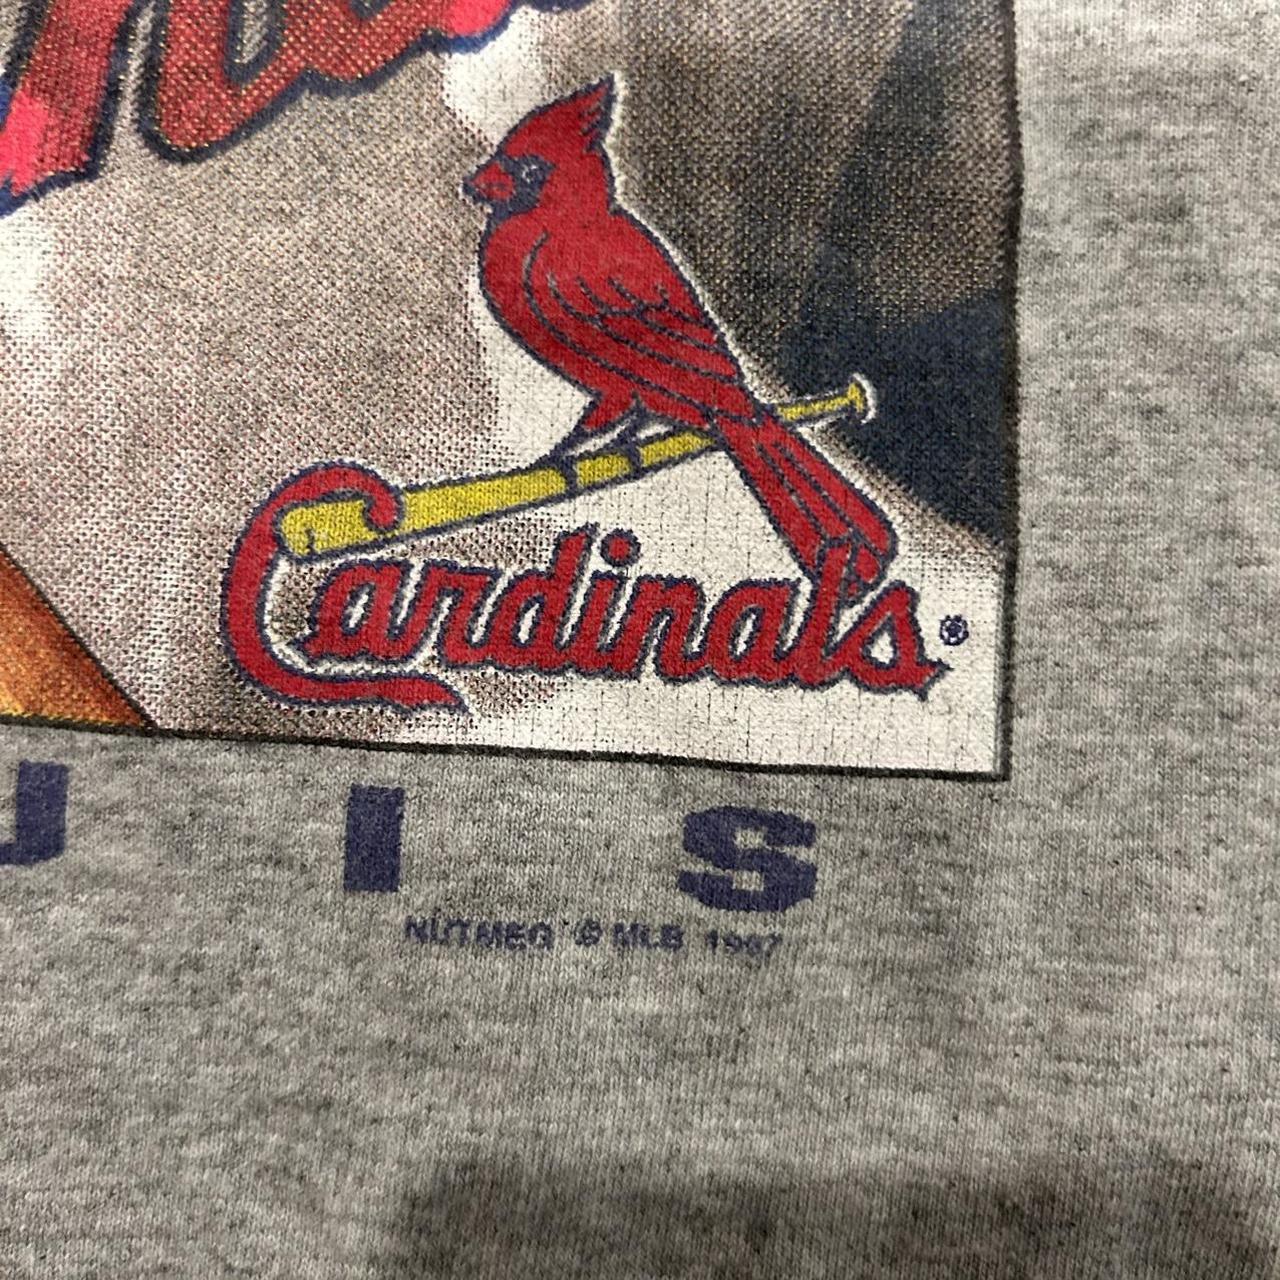 Vintage 90's Lee Sport St. Louis Cardinals Paint Drip T-Shirt ~ Youth  Med 10/12